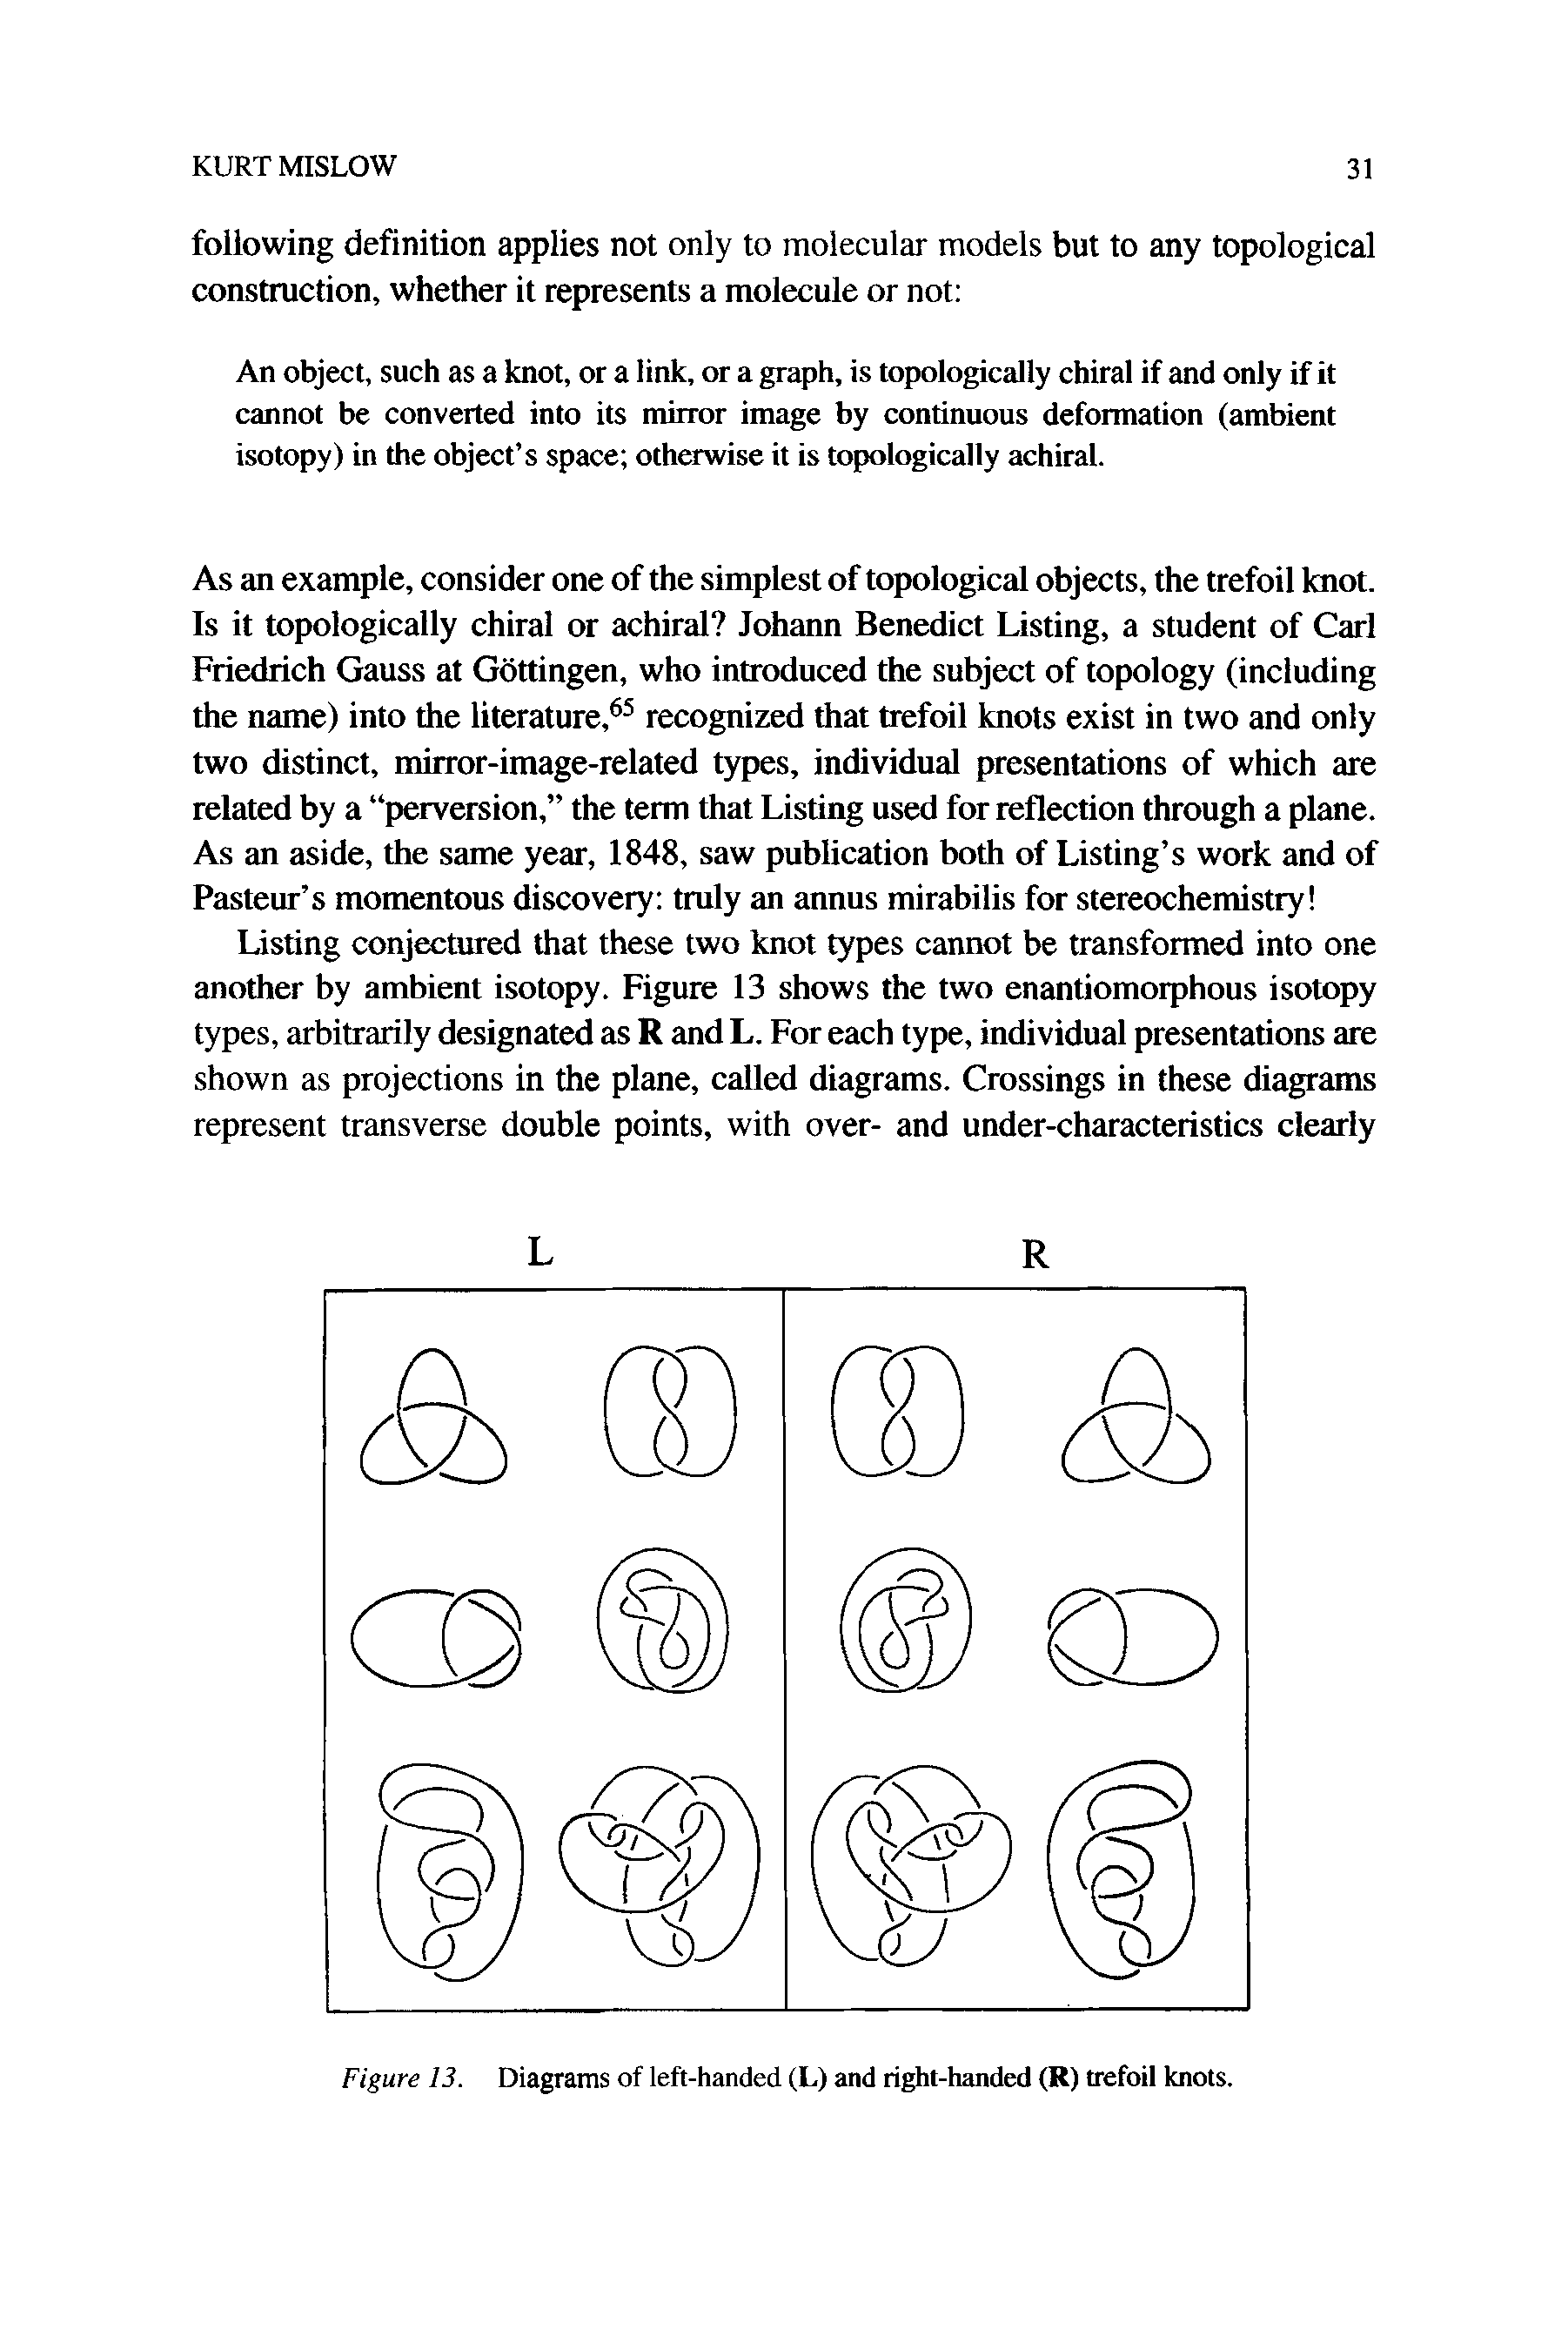 Figure 13. Diagrams of left-handed (L.) and right-handed (R) trefoil knots.